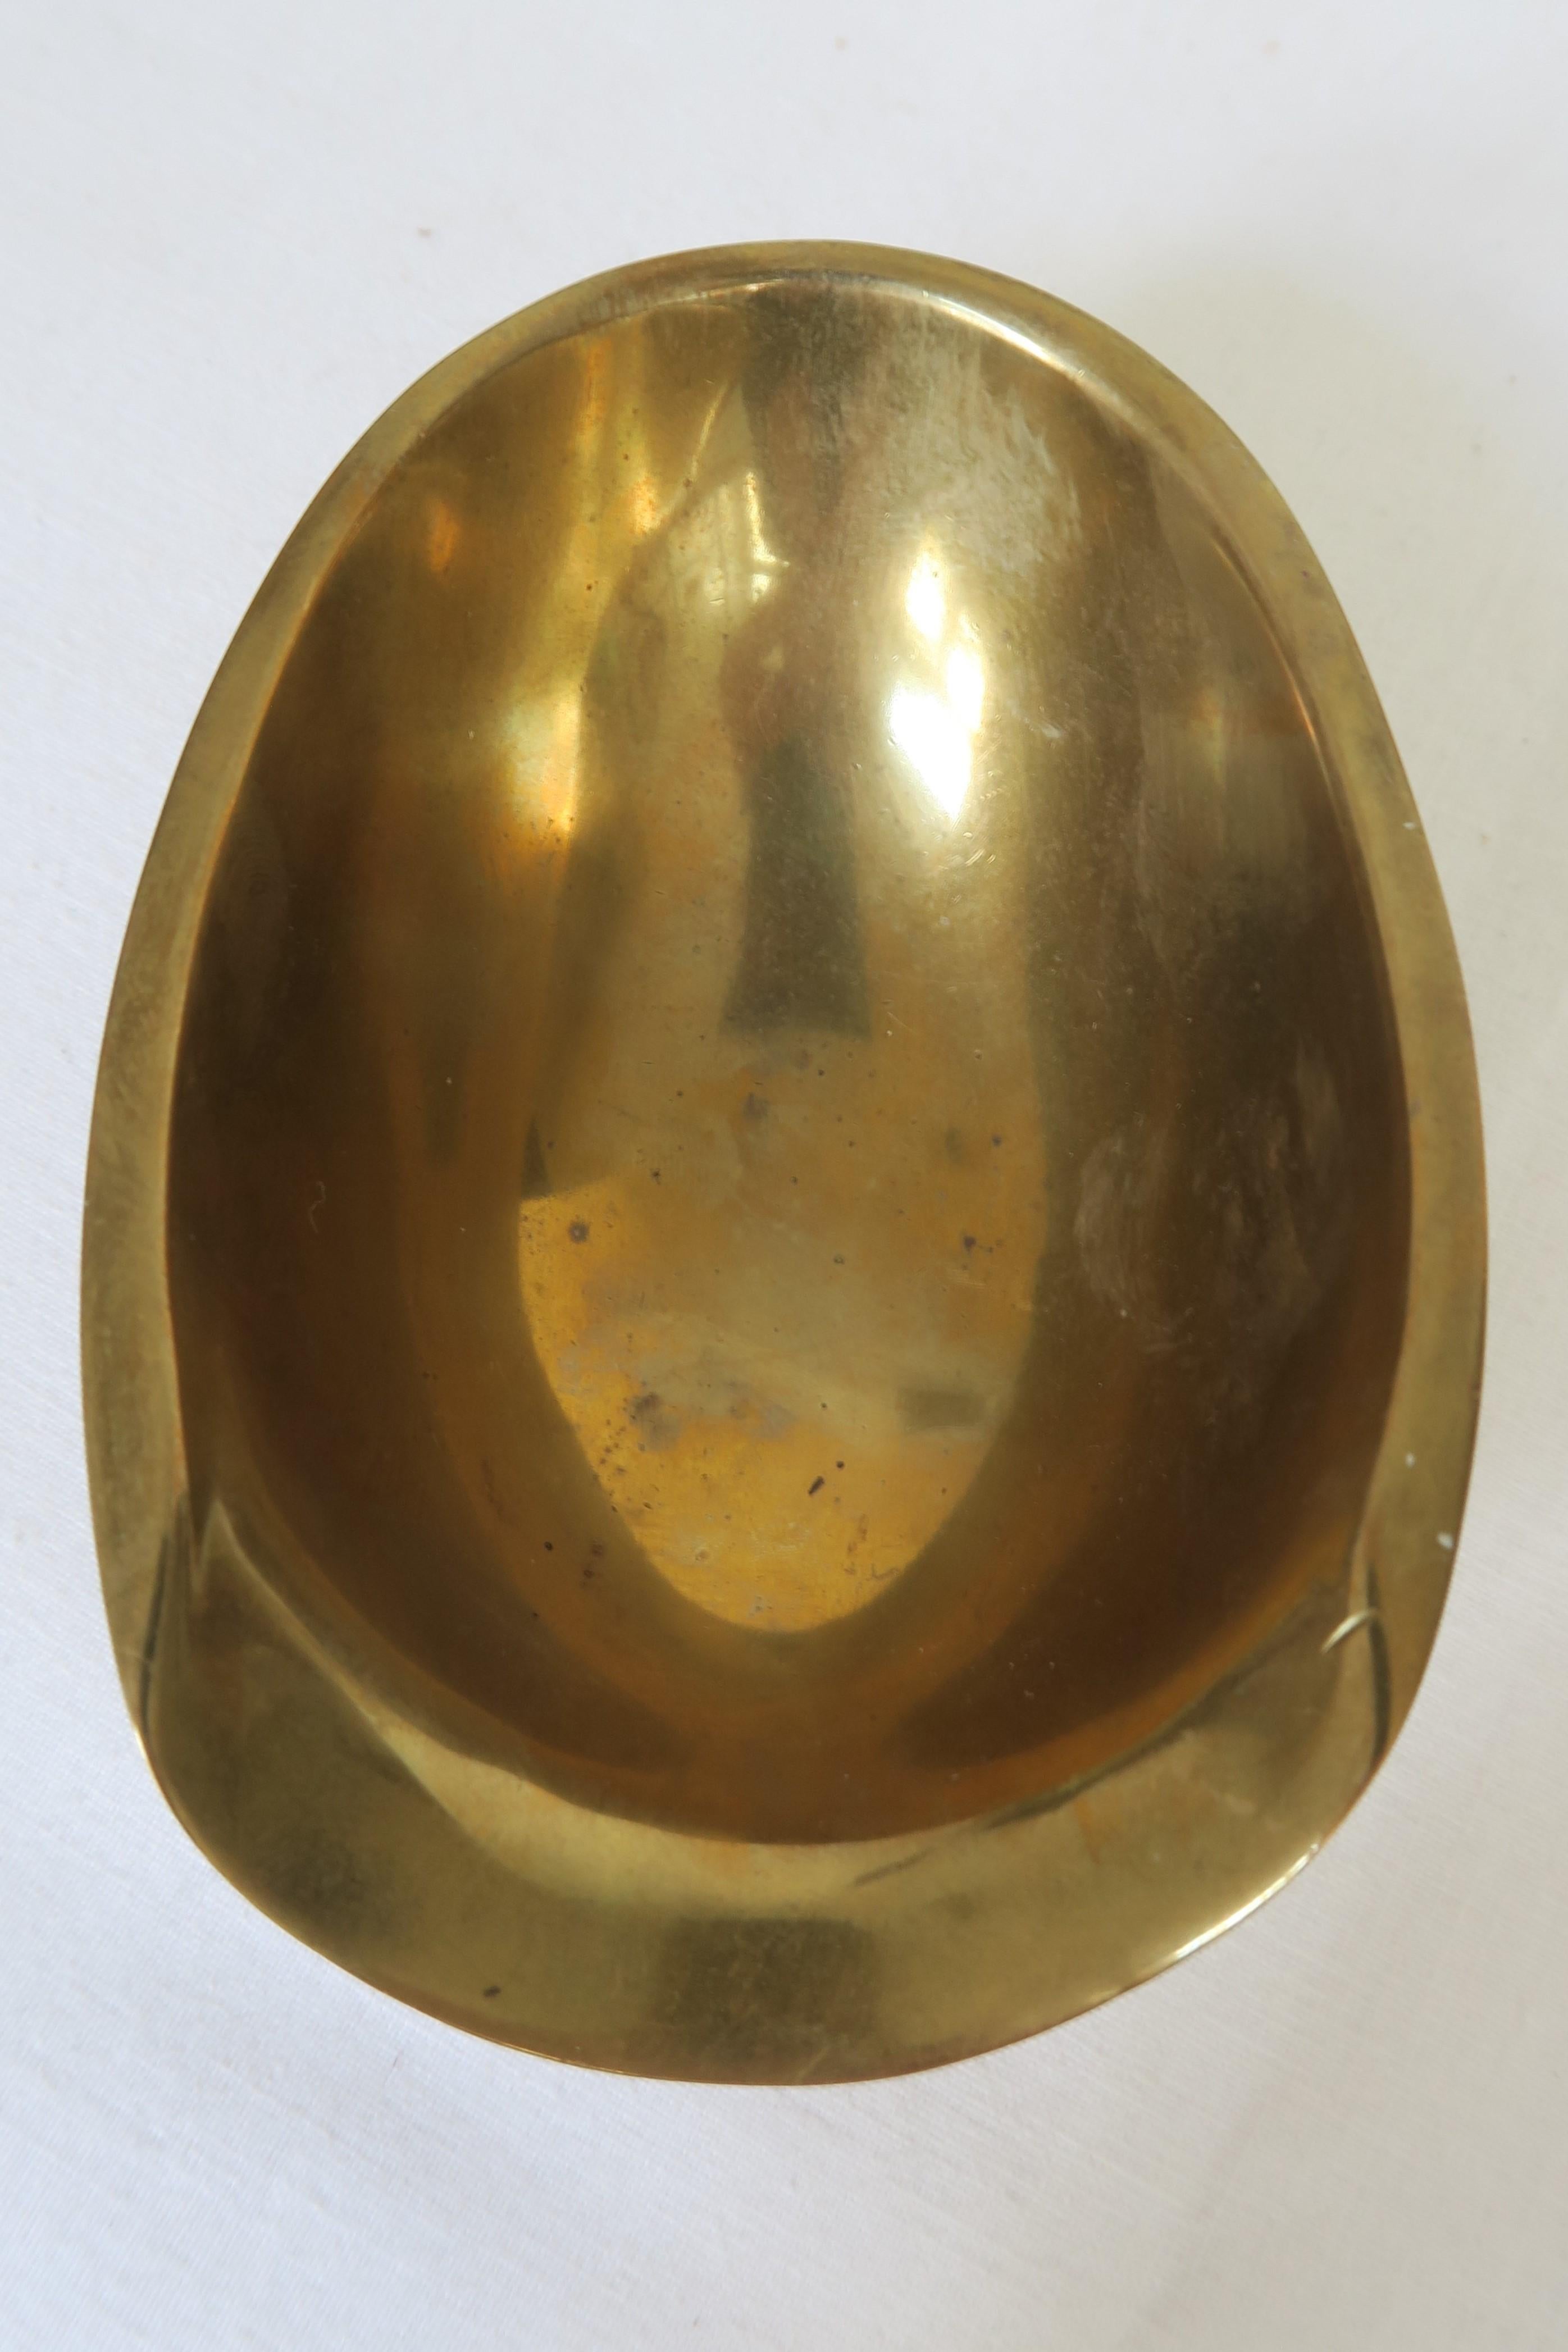 For sale is a unique piece of Mid-Century Modern design. The ashtray was mindfully cast out of solid golden-warm brass. It was produced and designed by the renowned Austrian workshops of Hagenauer Wien. The surface is polished to a shine and